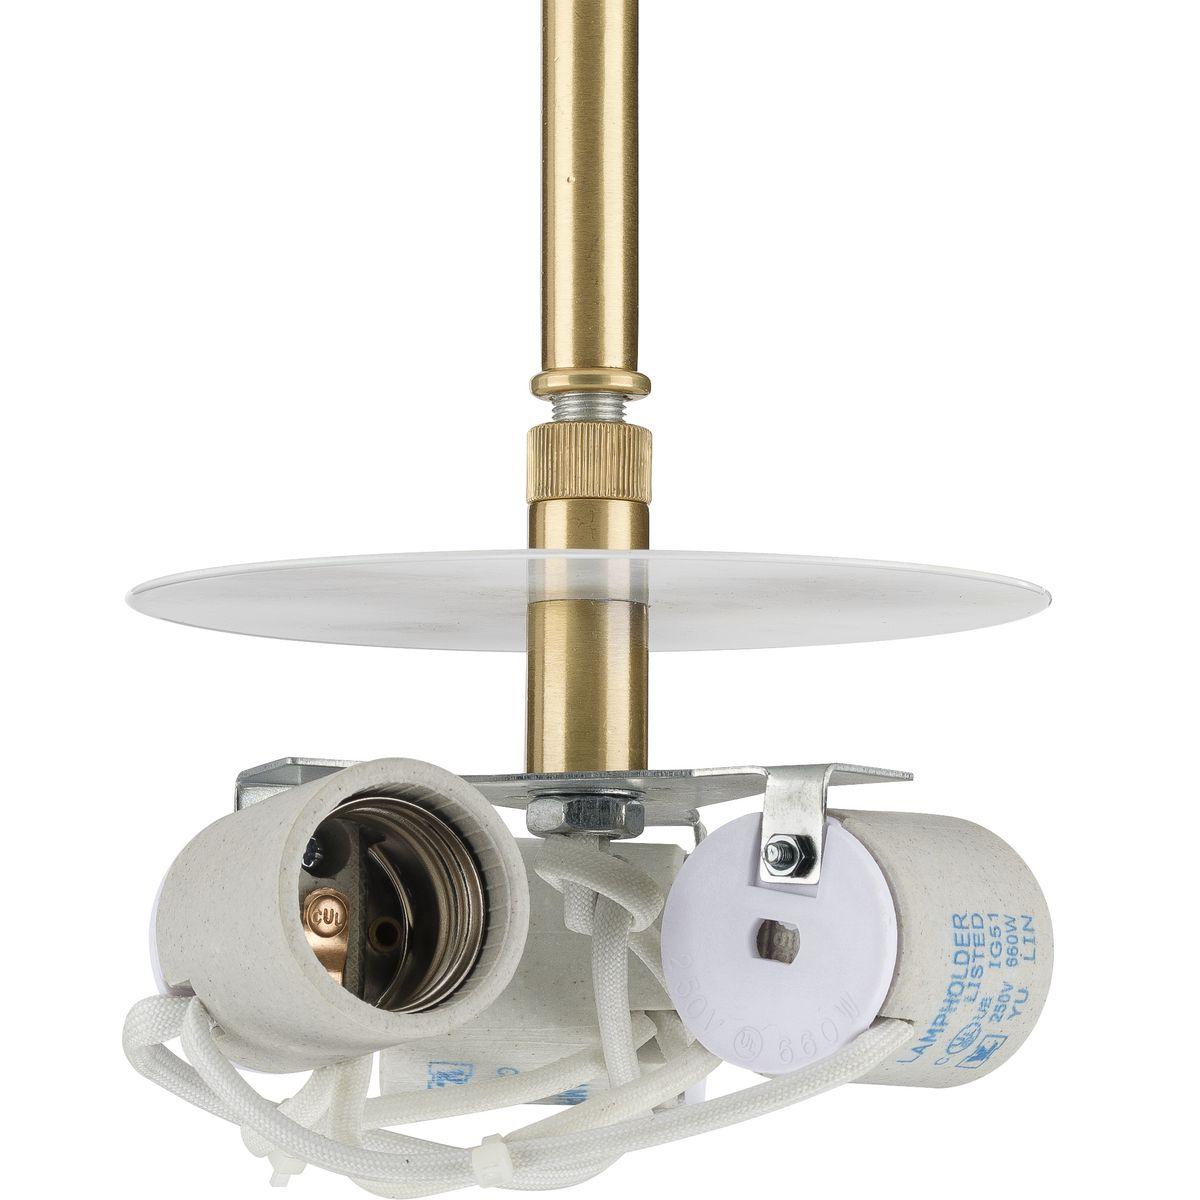 Hubbell P5199-12 This versatile modular pendant stem kit system will help to make installation simple. The stem kit allows you to customize lighting to perfectly fit the personality of your home. A satin brass finish coats this pendant stem kit system.  ; Customize lighti